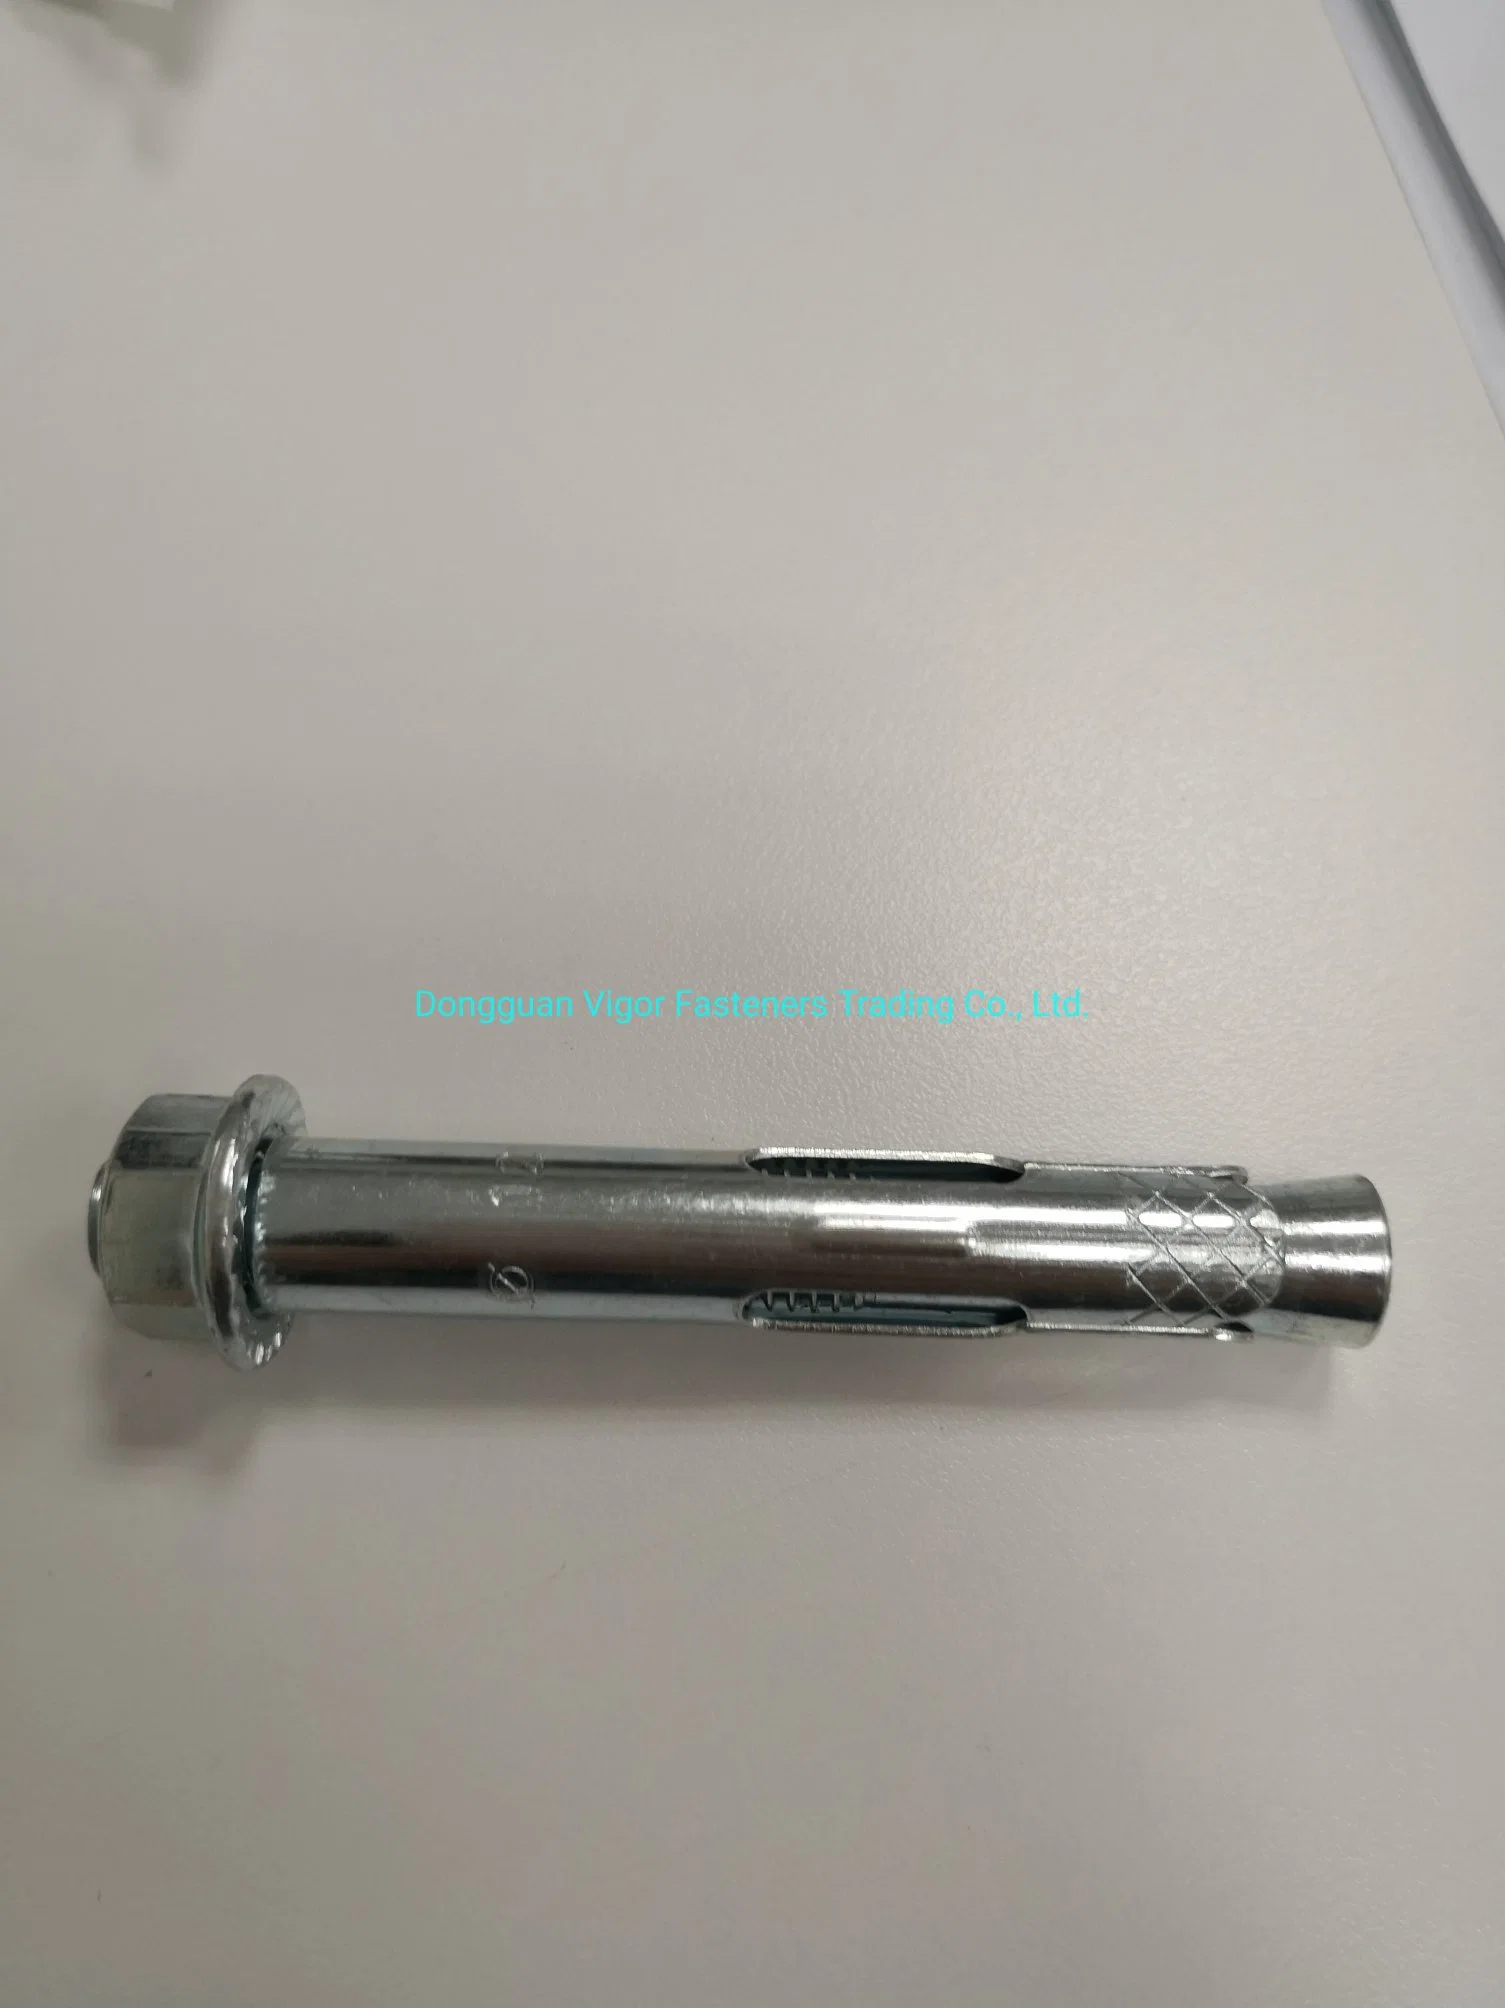 Sleeve Anchor - Carbon Steel, Stainless Steel Class 4.8/5.8 Zinc Galvanised with Flange Nut Expansion Bolt